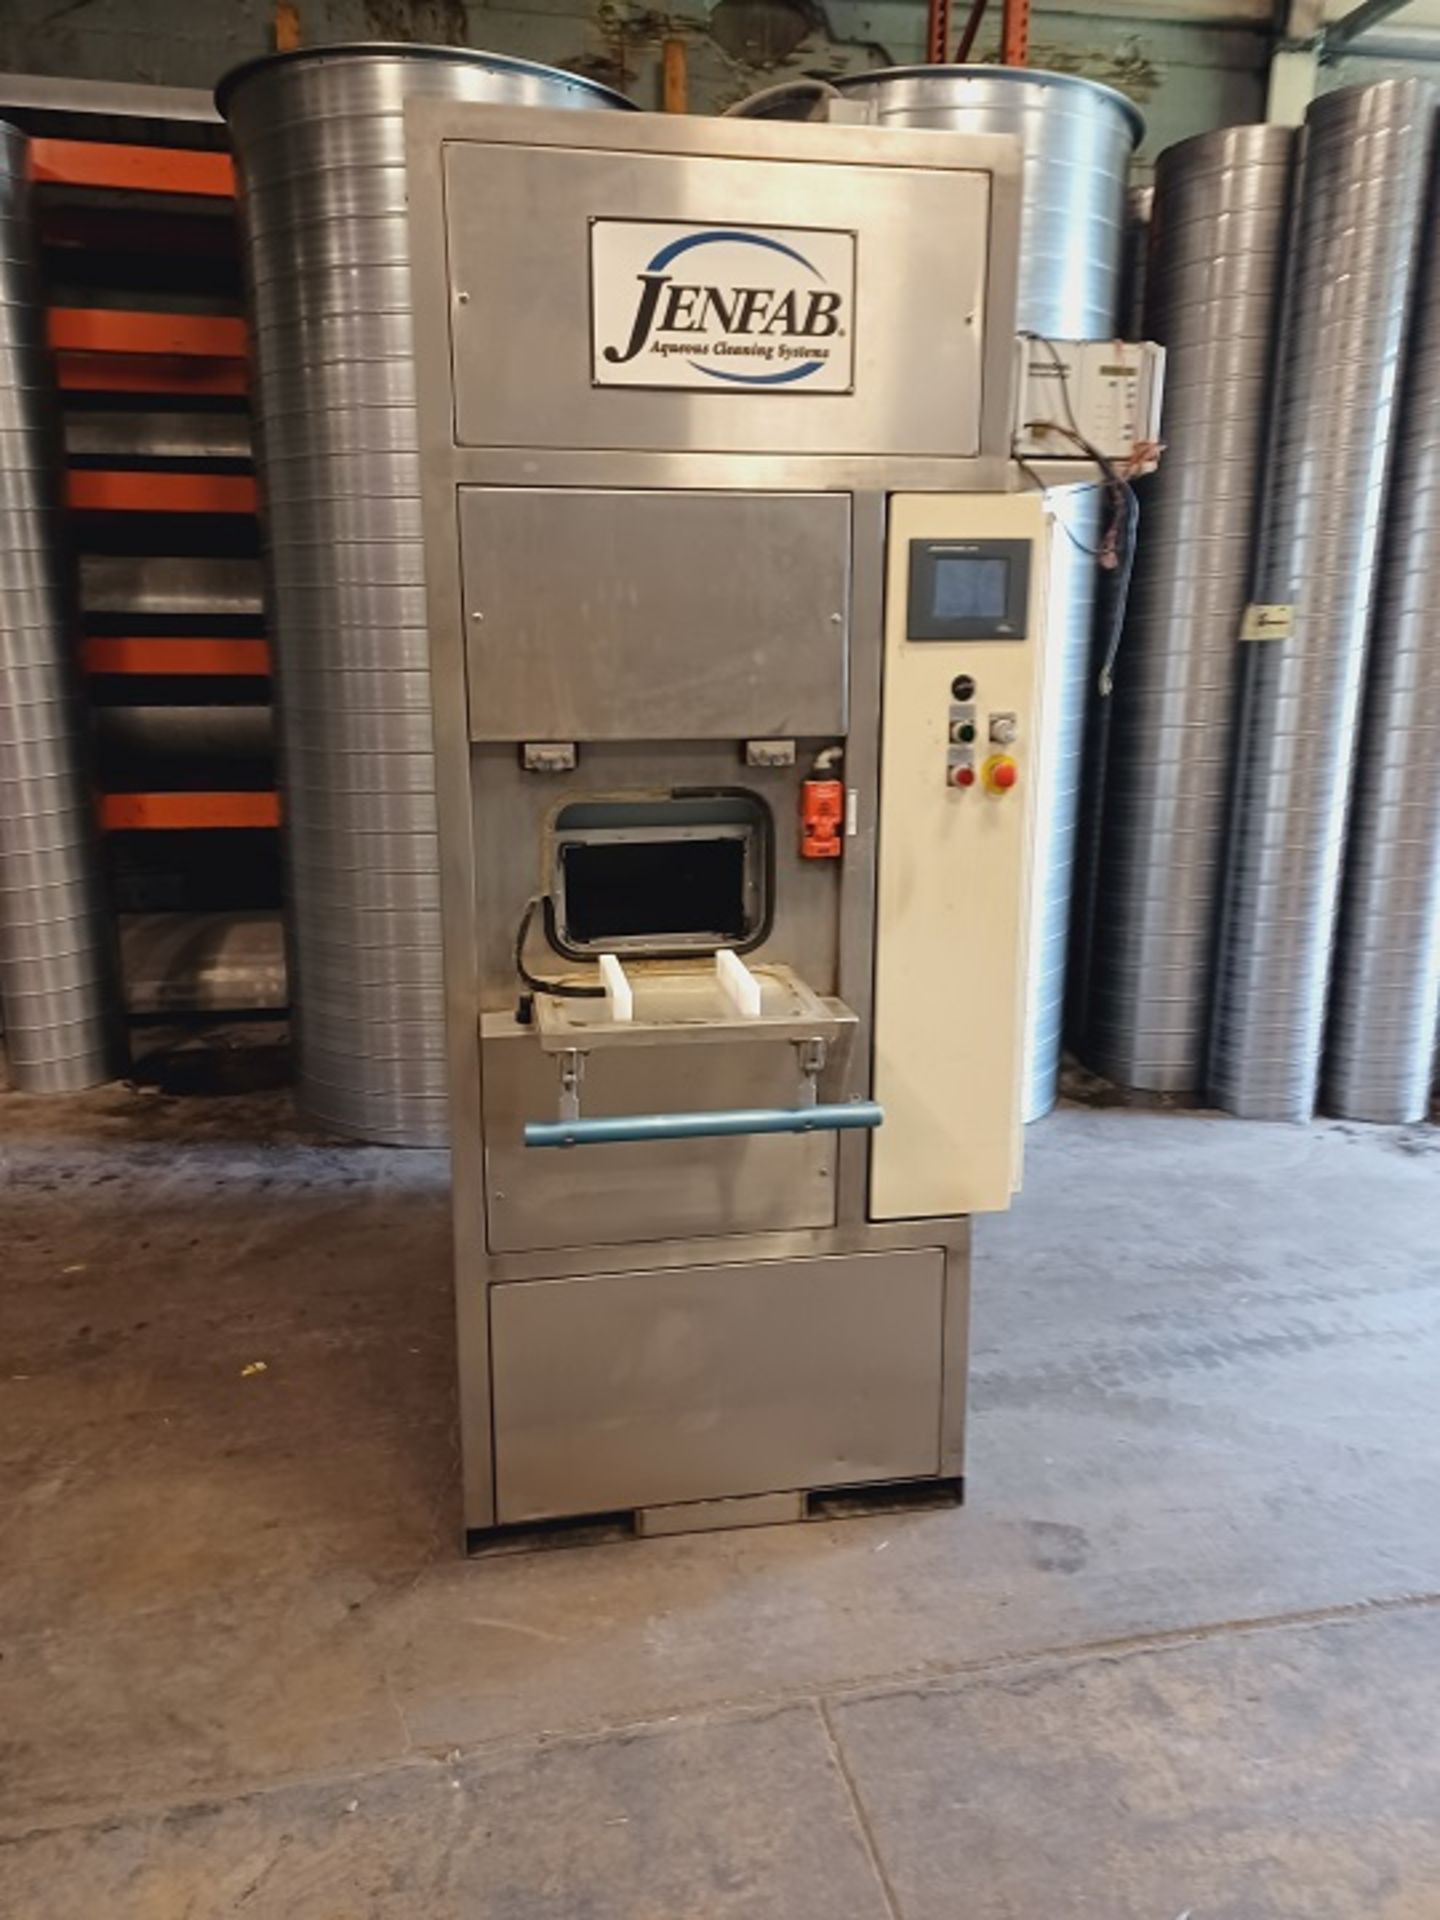 JenFab Aqueous Cleaning System, 6.5" X 12" Opening, Branson Sono Module Control